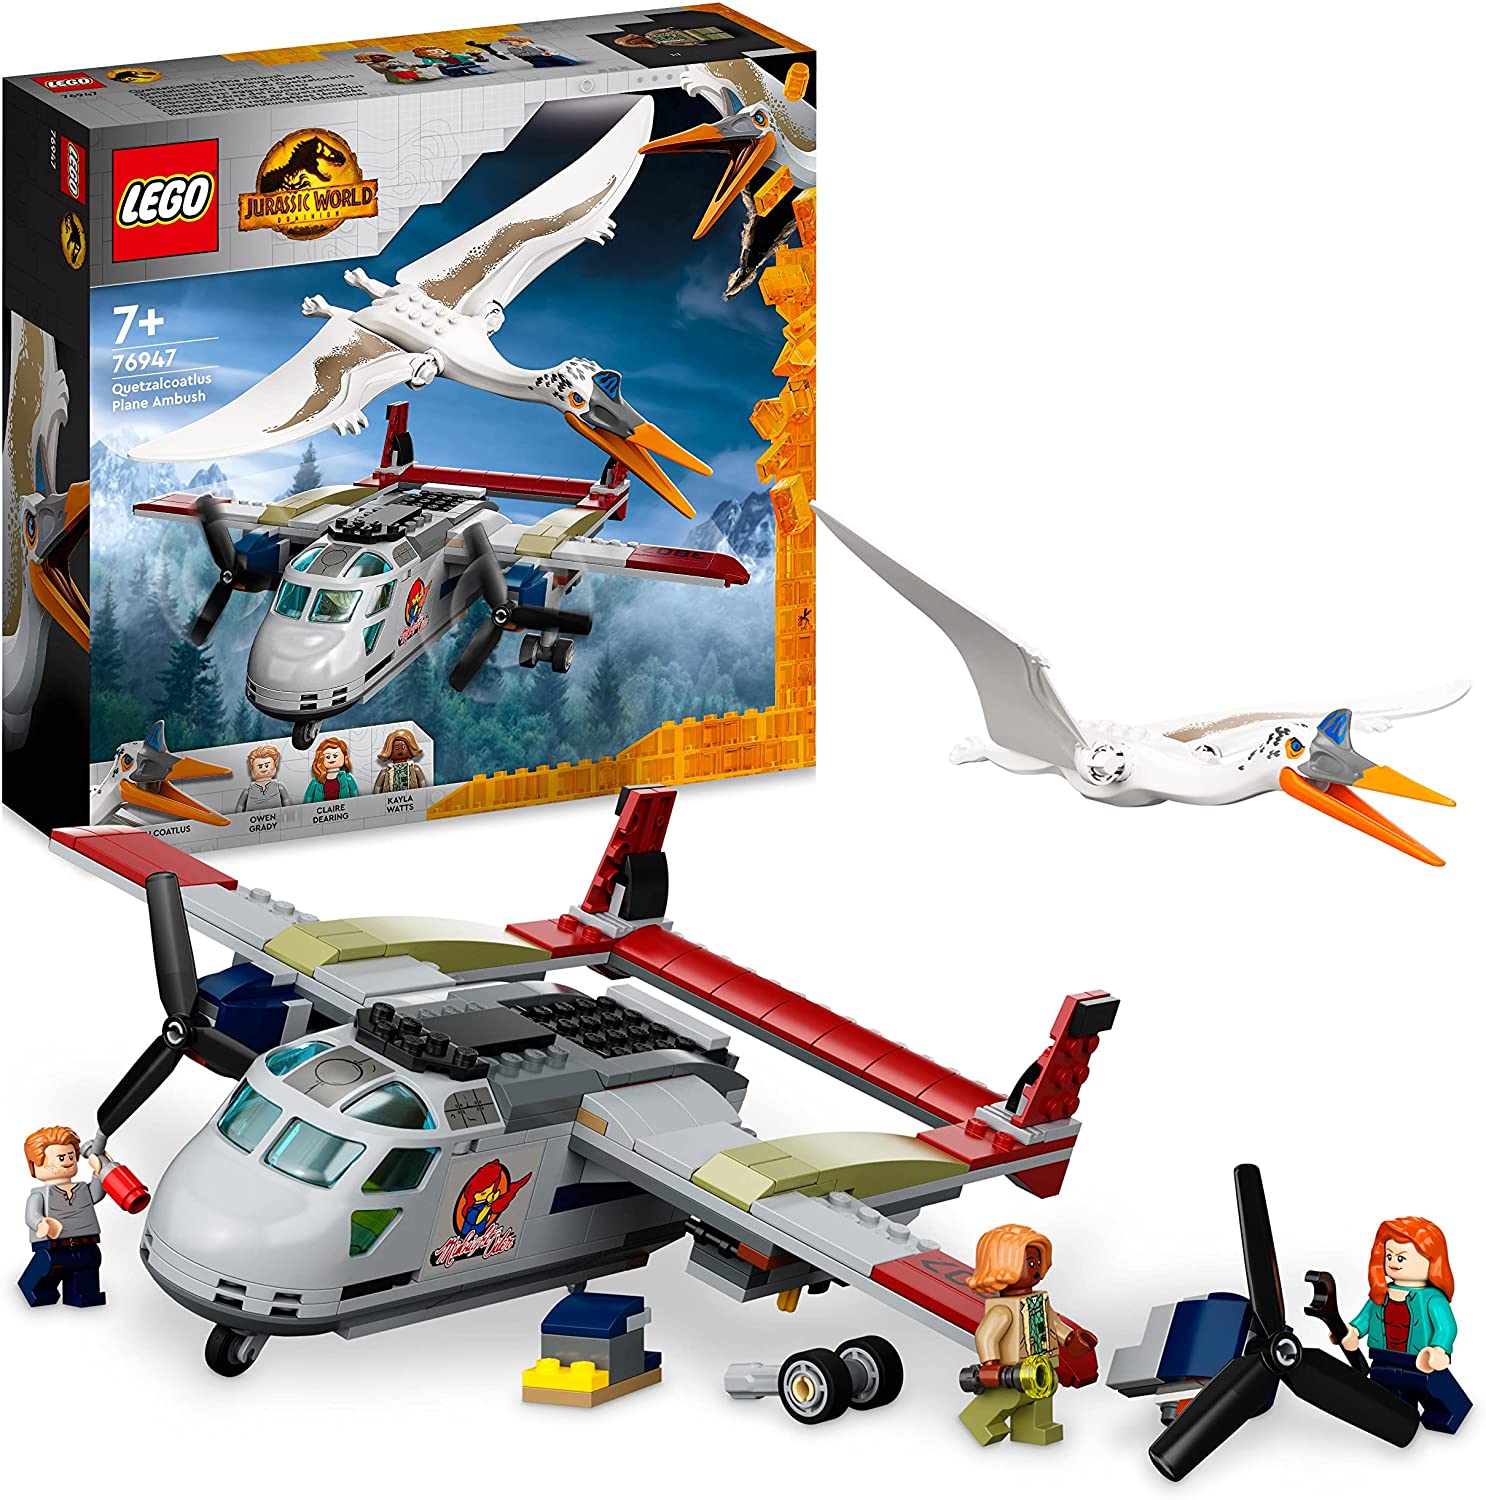 LEGO 76947 Jurassic World Quetzalcoatlus: Aeroplane Rattack, Dinosaur Toy with Figures for Children from 7 Years